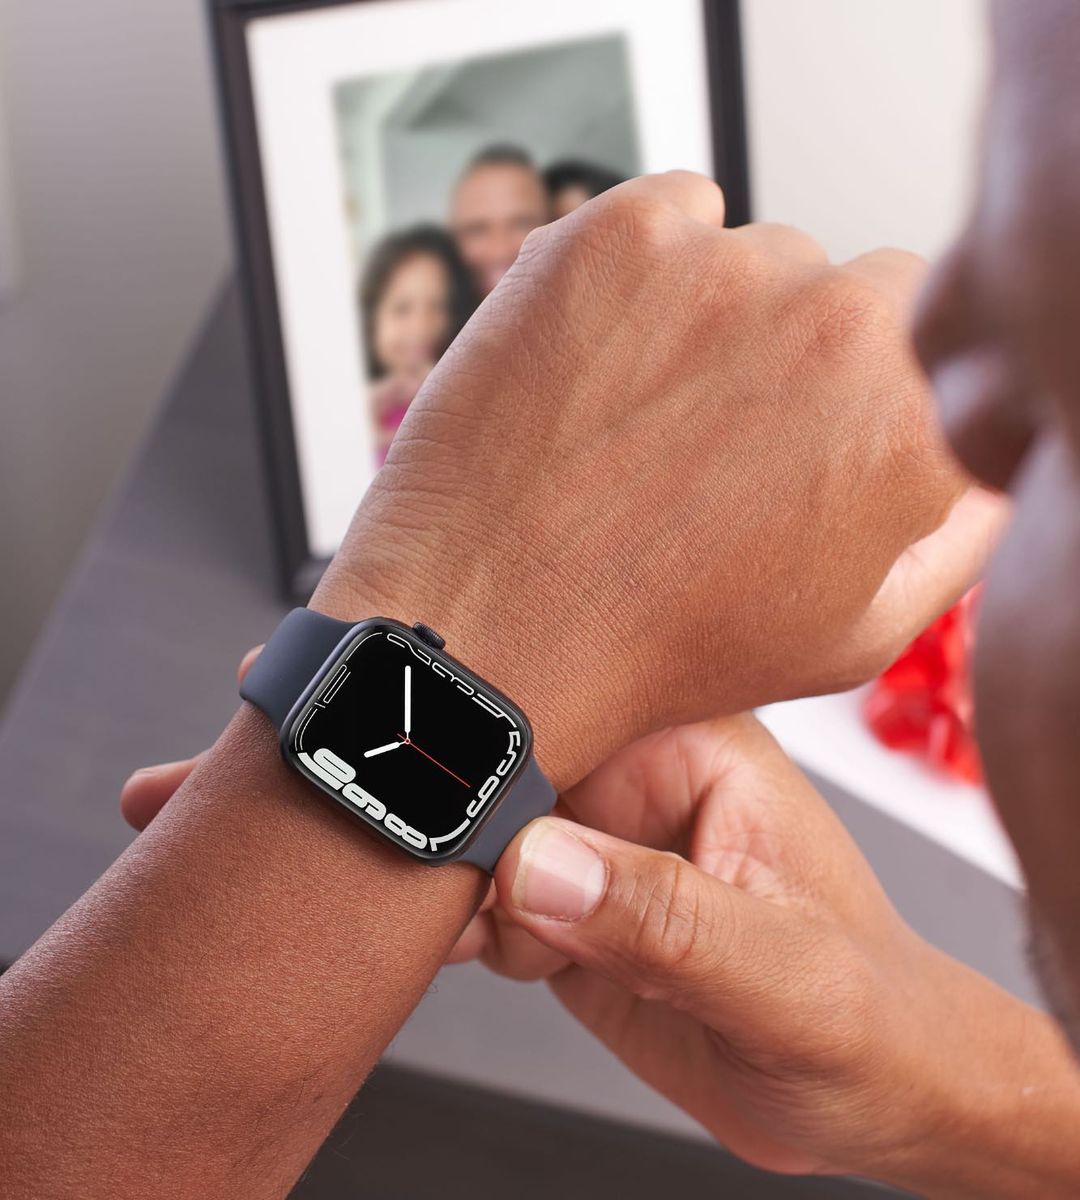 Close-up image of a person wearing a smart watch on his left wrist. There is a family photo in a frame in the background